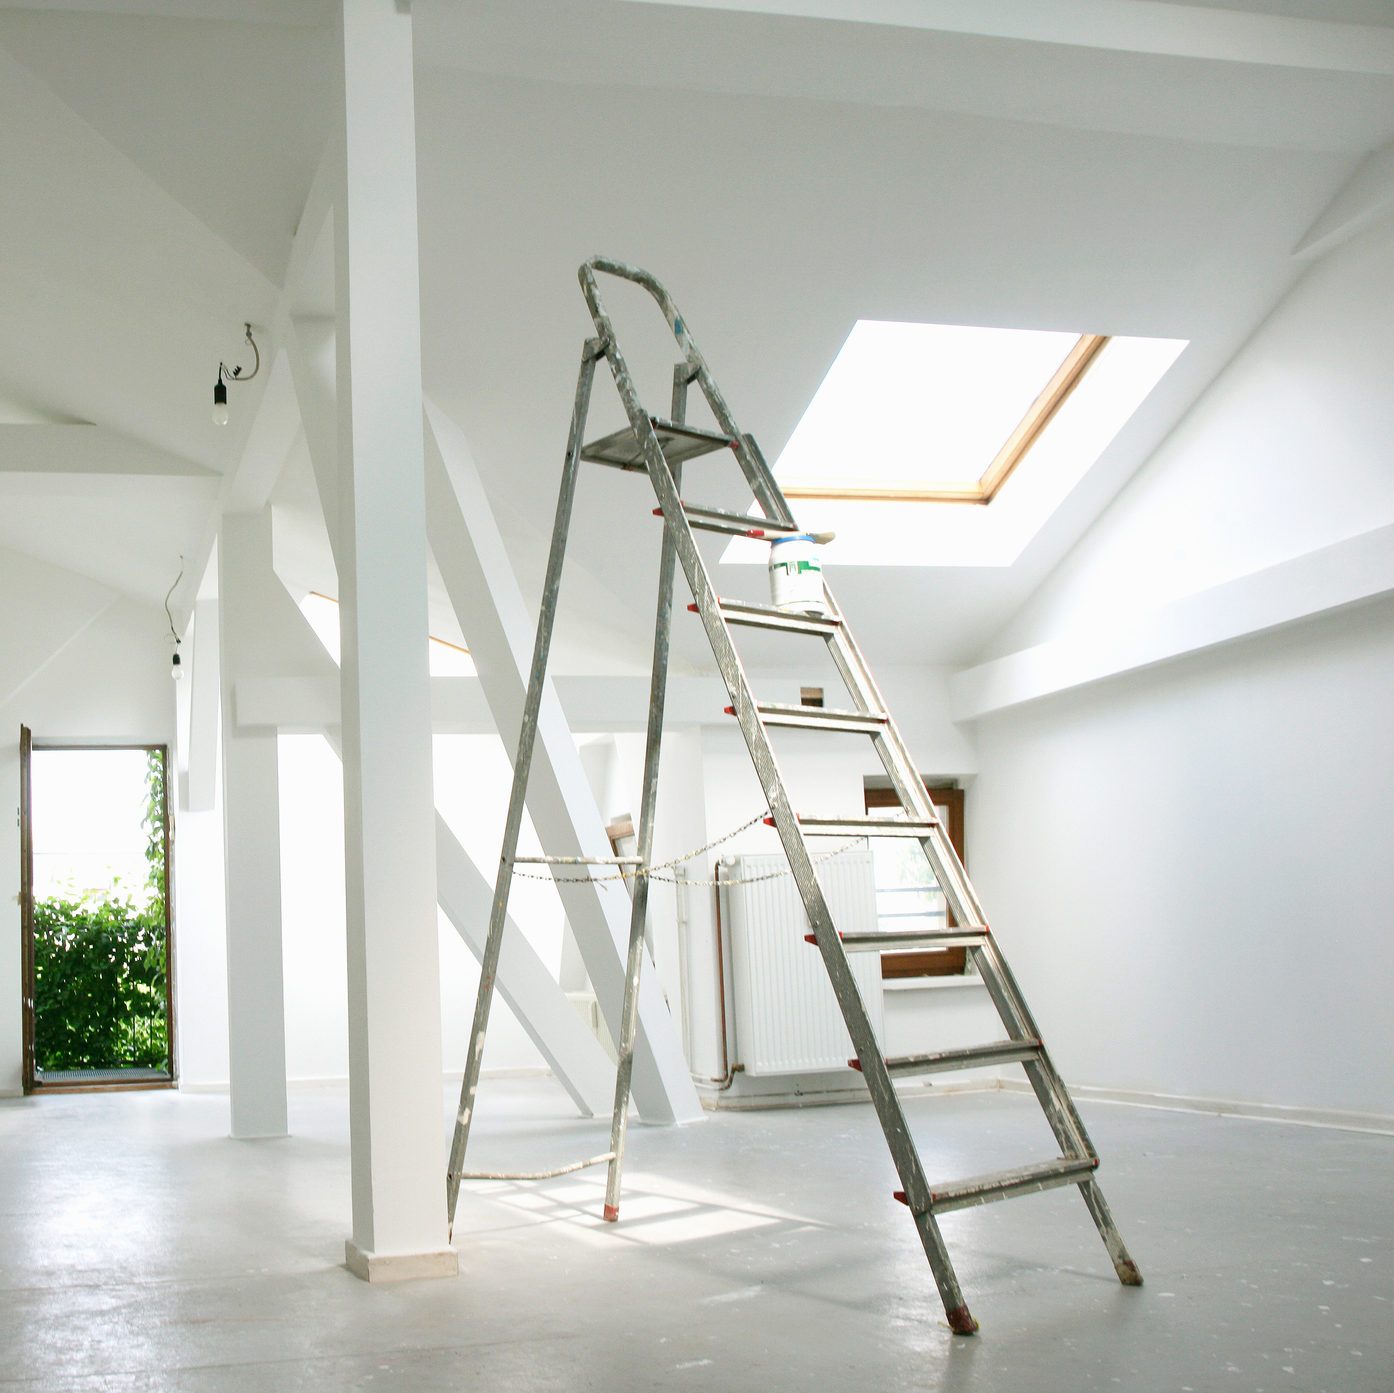 Metal ladder in empty house